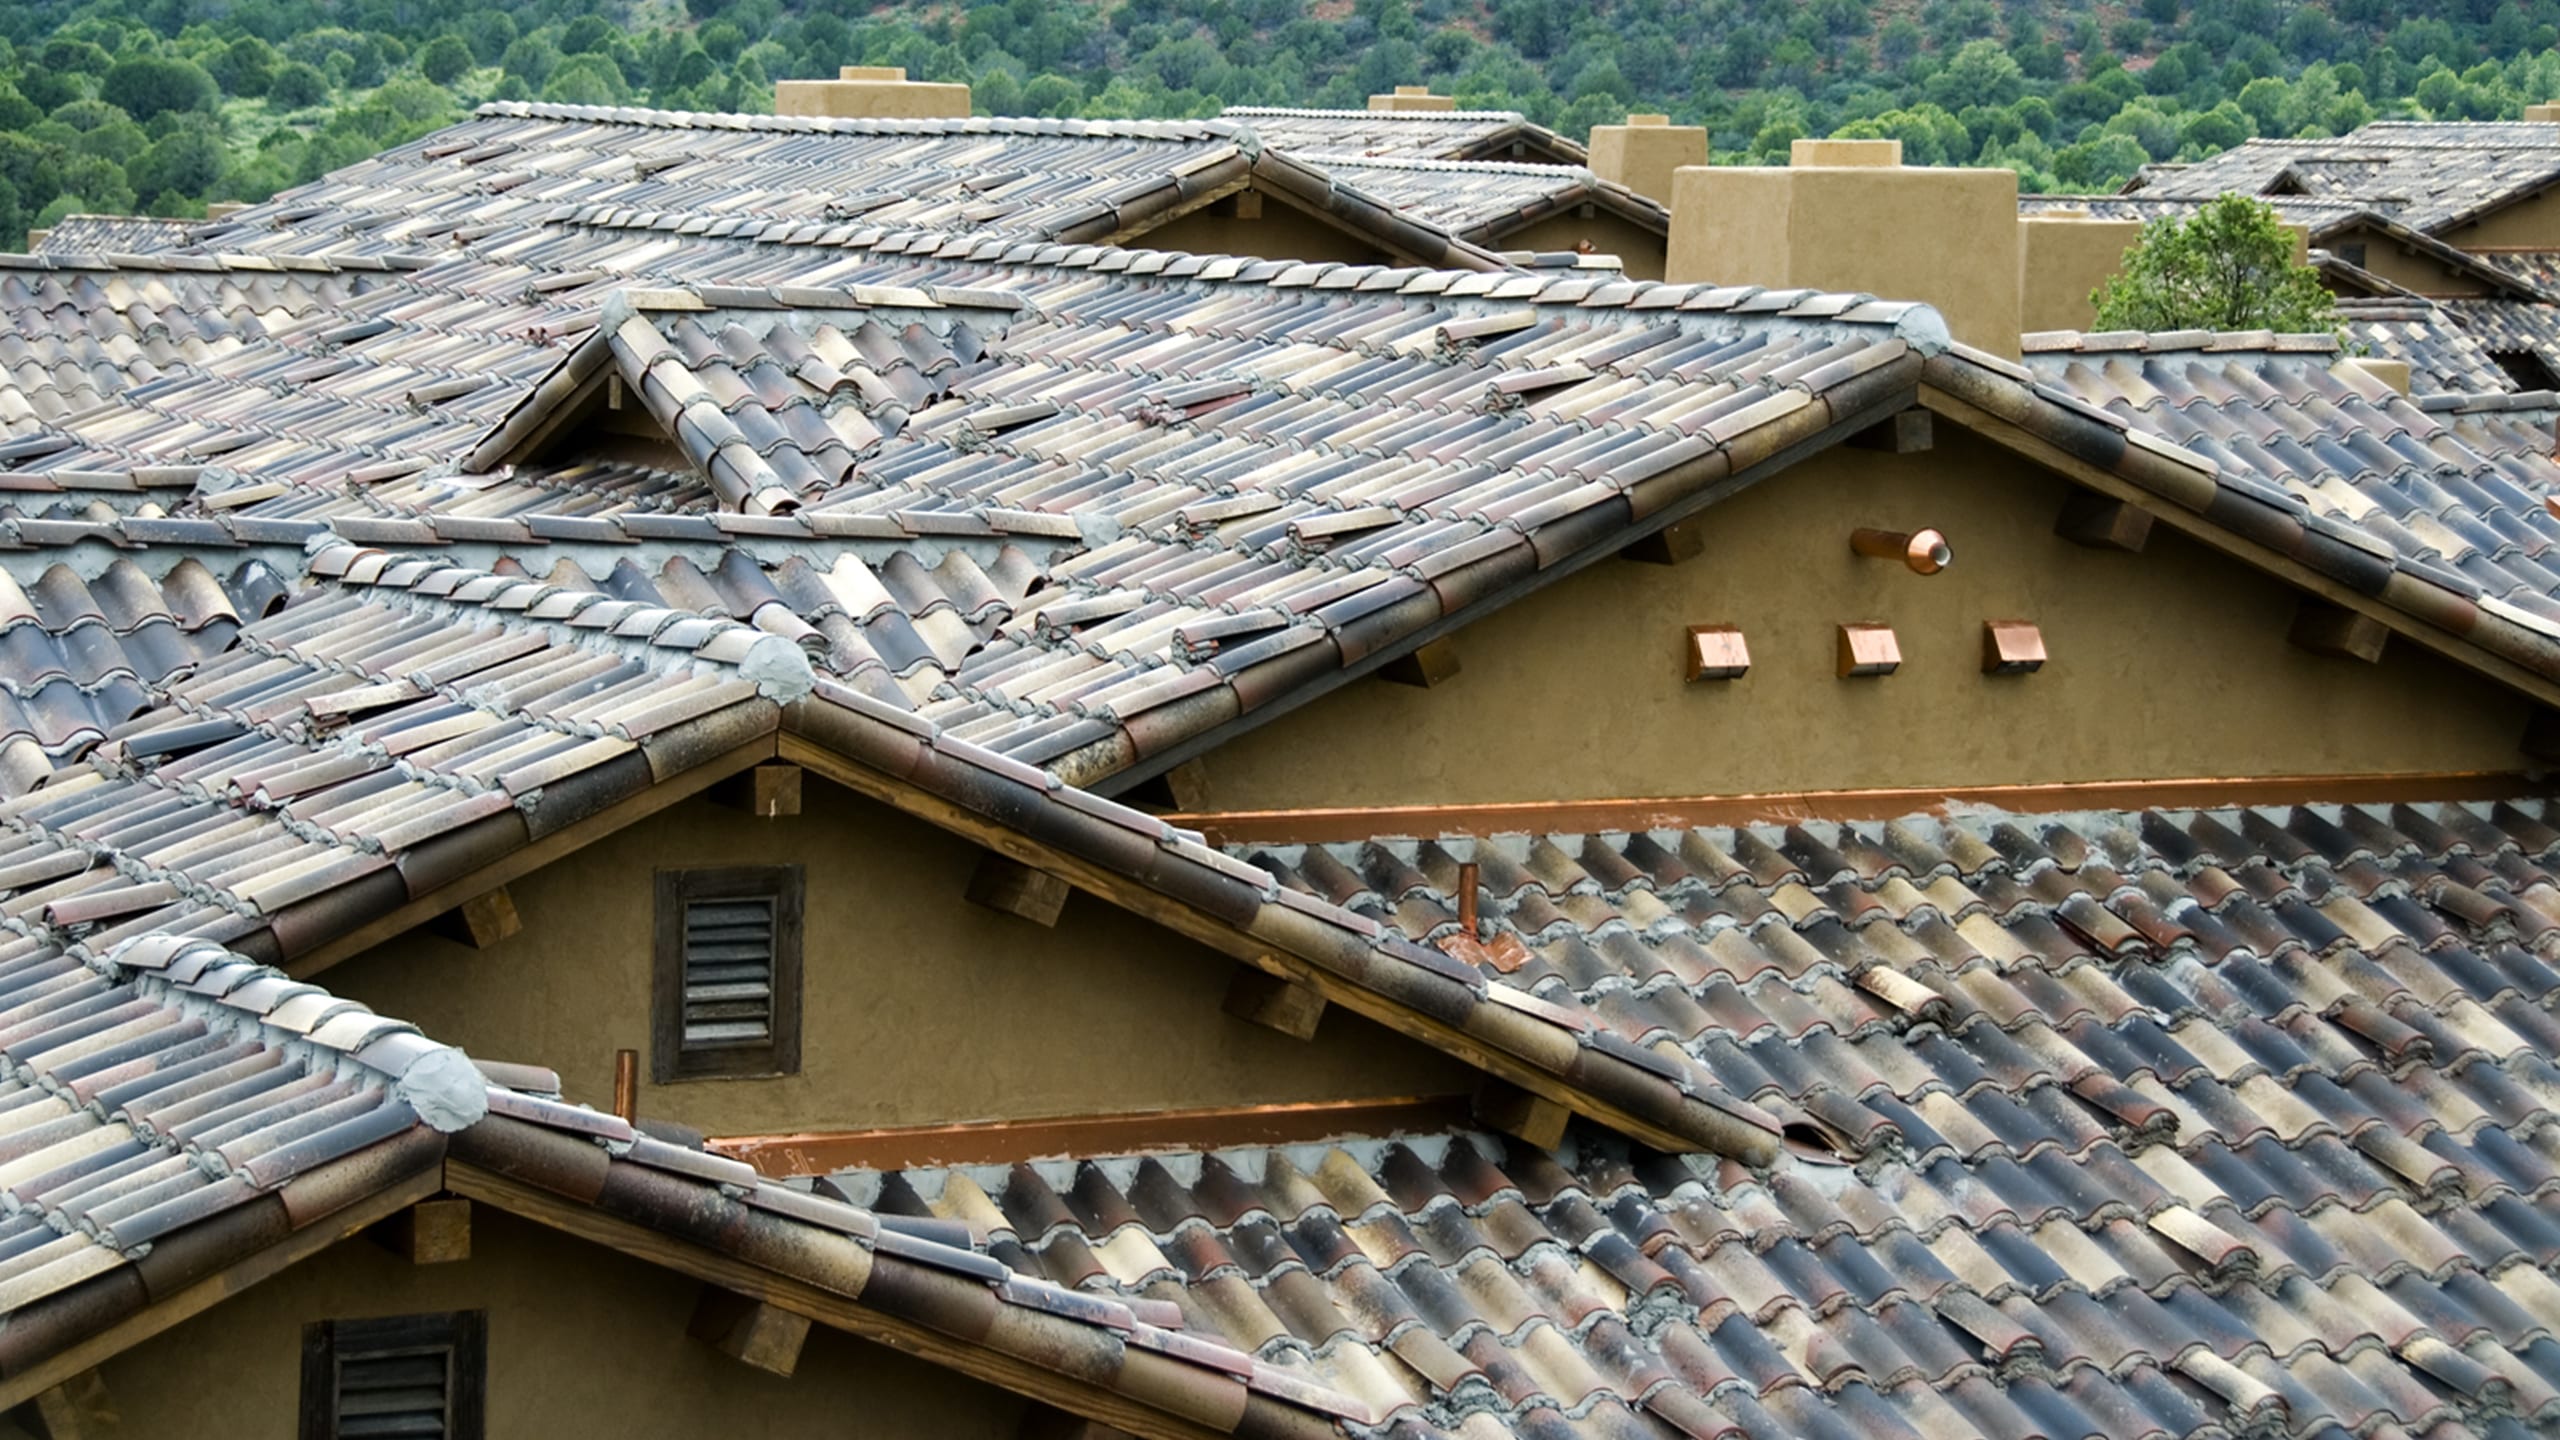 The Villas at Seven Canyons Featuring Ludowici Spanish Clay Roof Tile